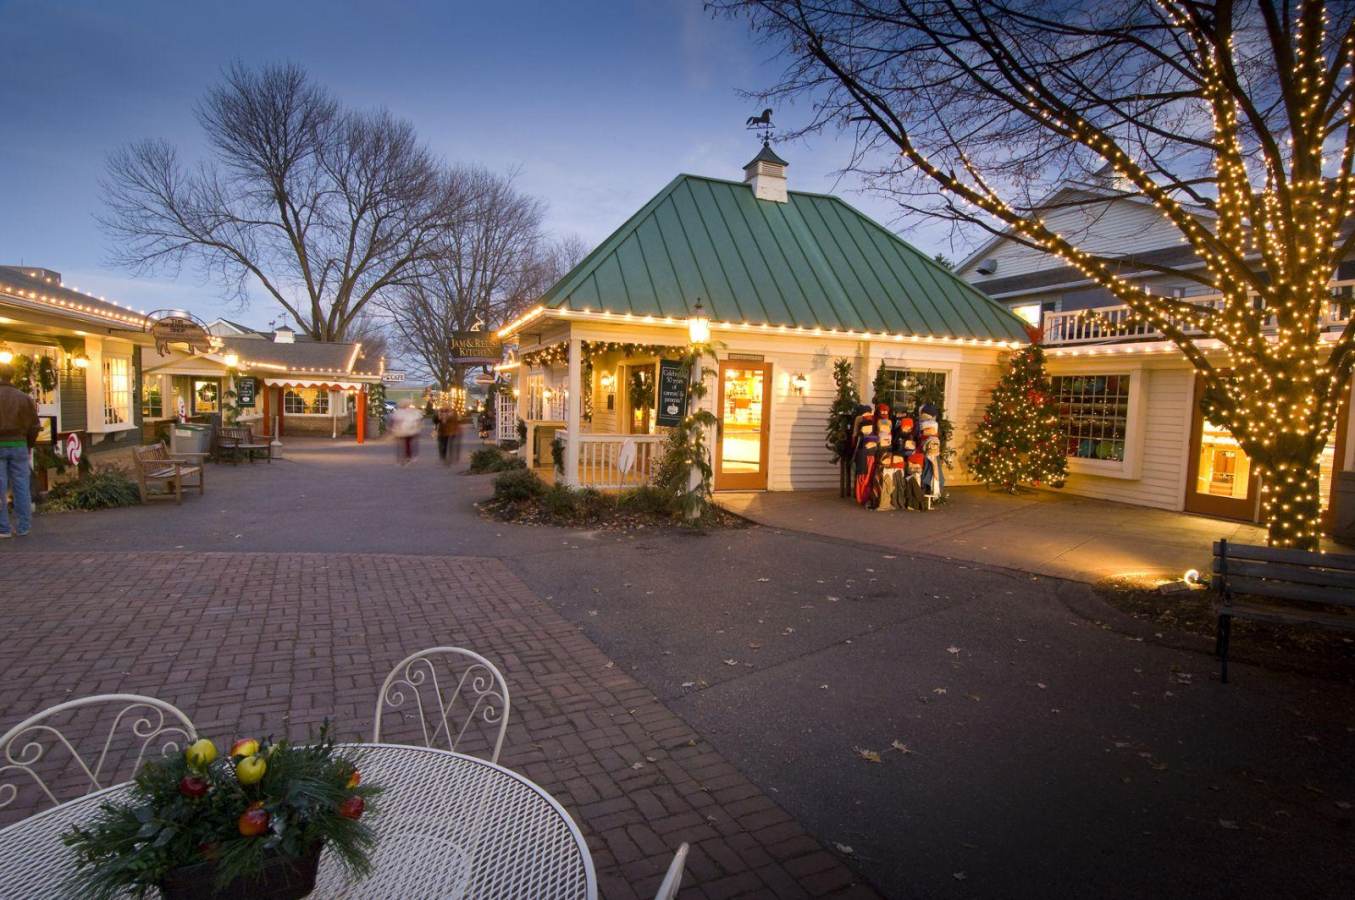 An evening exterior at Kitchen Kettle Village, adorned with holiday lights in Lancaster, PA Credit: DiscoverLancaster.com